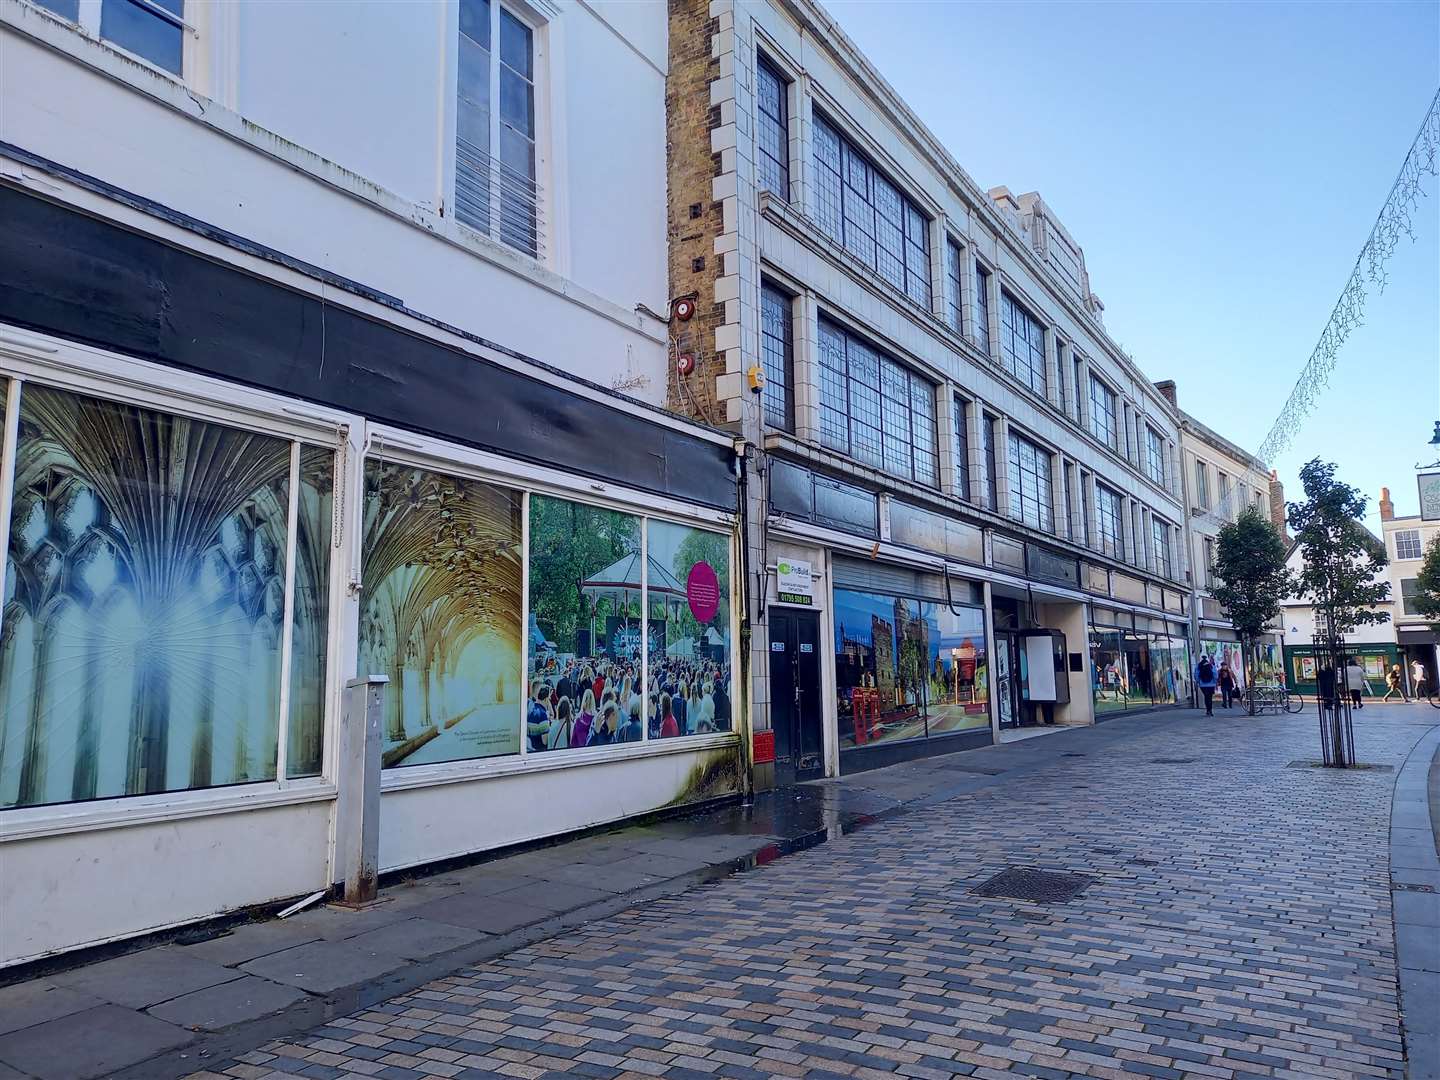 Guildhall Street has become a retail ghost town - hopefully things can change in 2022